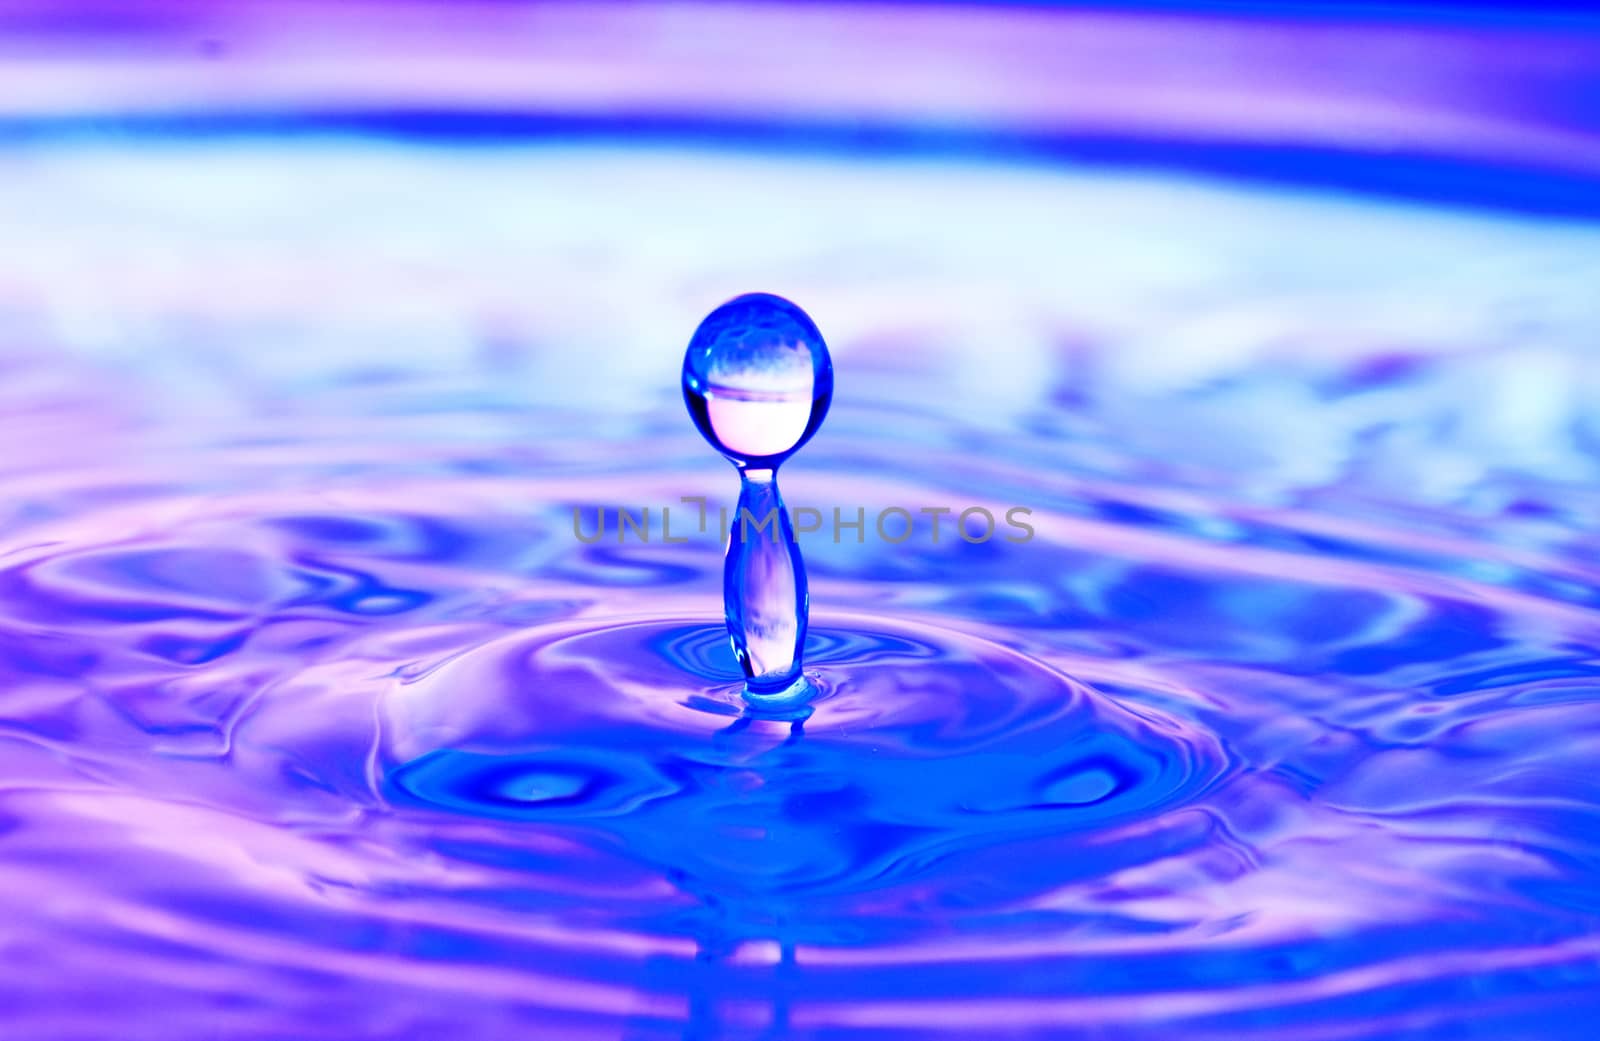 Stop action of ripples from a water drop with purple reflection